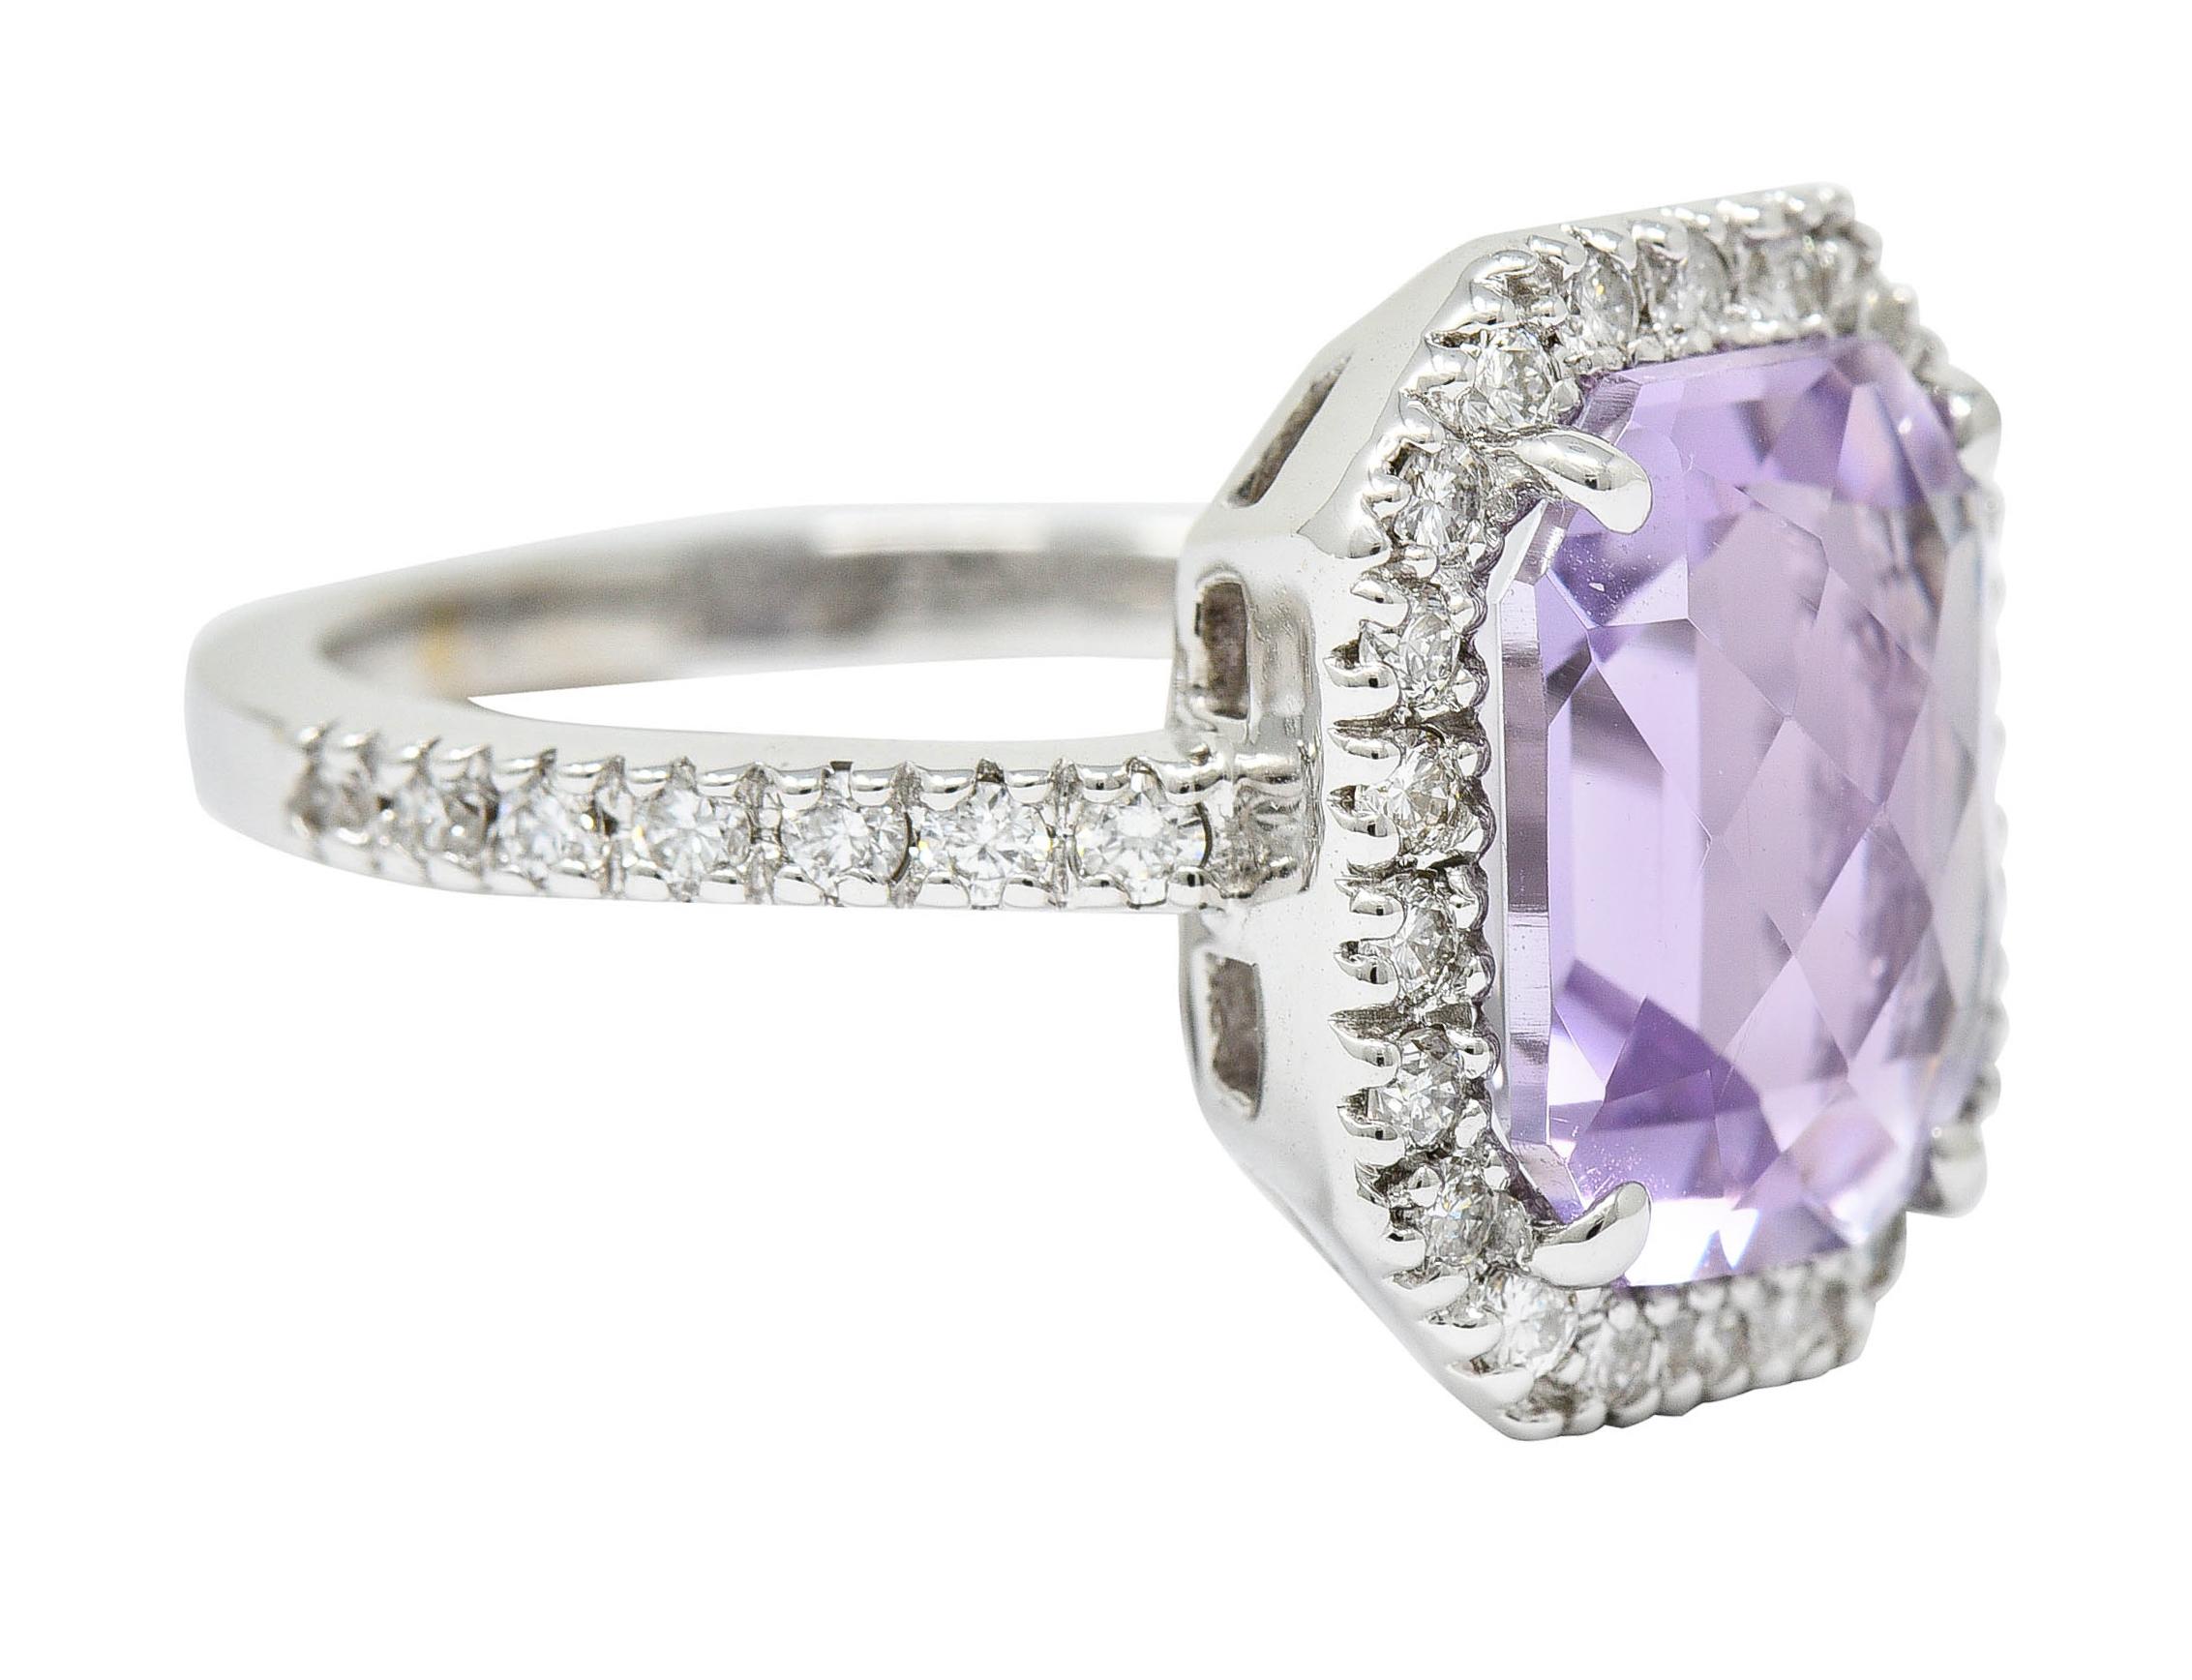 Cluster ring centers a mixed checkerboard octagonal cut amethyst

Transparent with medium light pinkish purple Rose de France color

Surrounded by a diamond halo with accented shoulders

Round brilliant cut diamonds weigh in total approximately 0.75